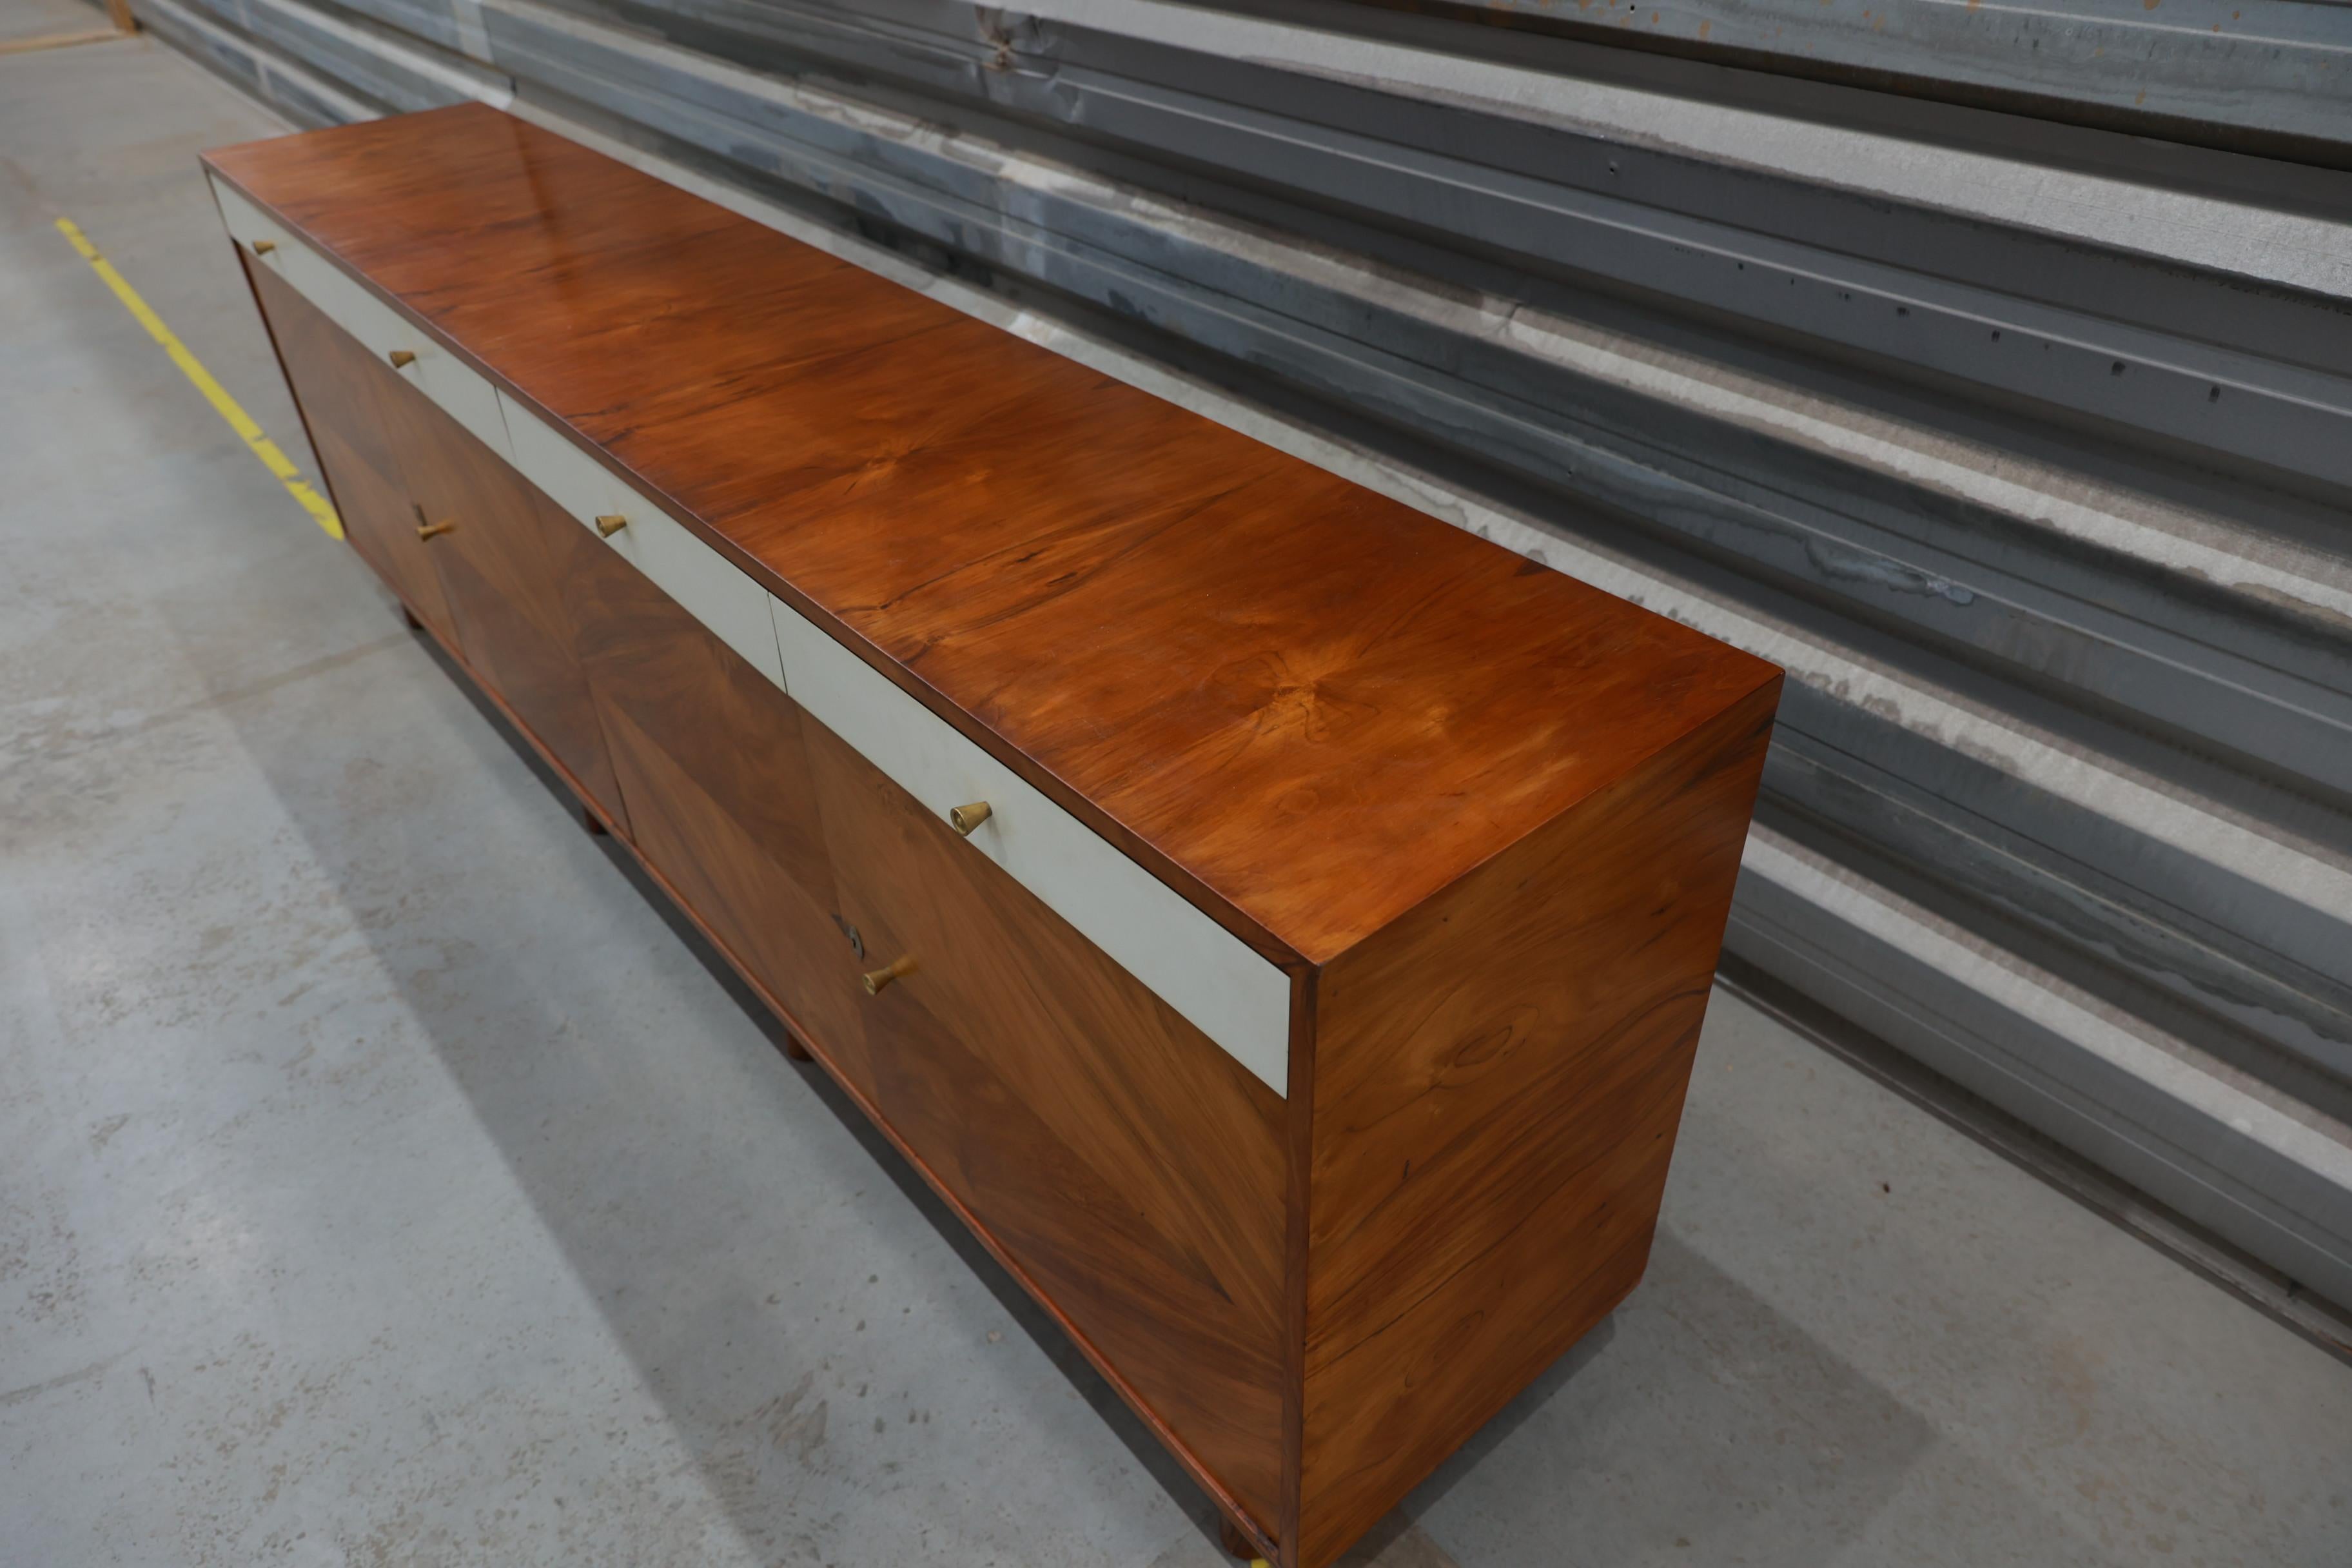 Hand-Crafted Credenza in Hardwood and Brass, Ernesto Hauner for Mobilinea, c. 1960s For Sale